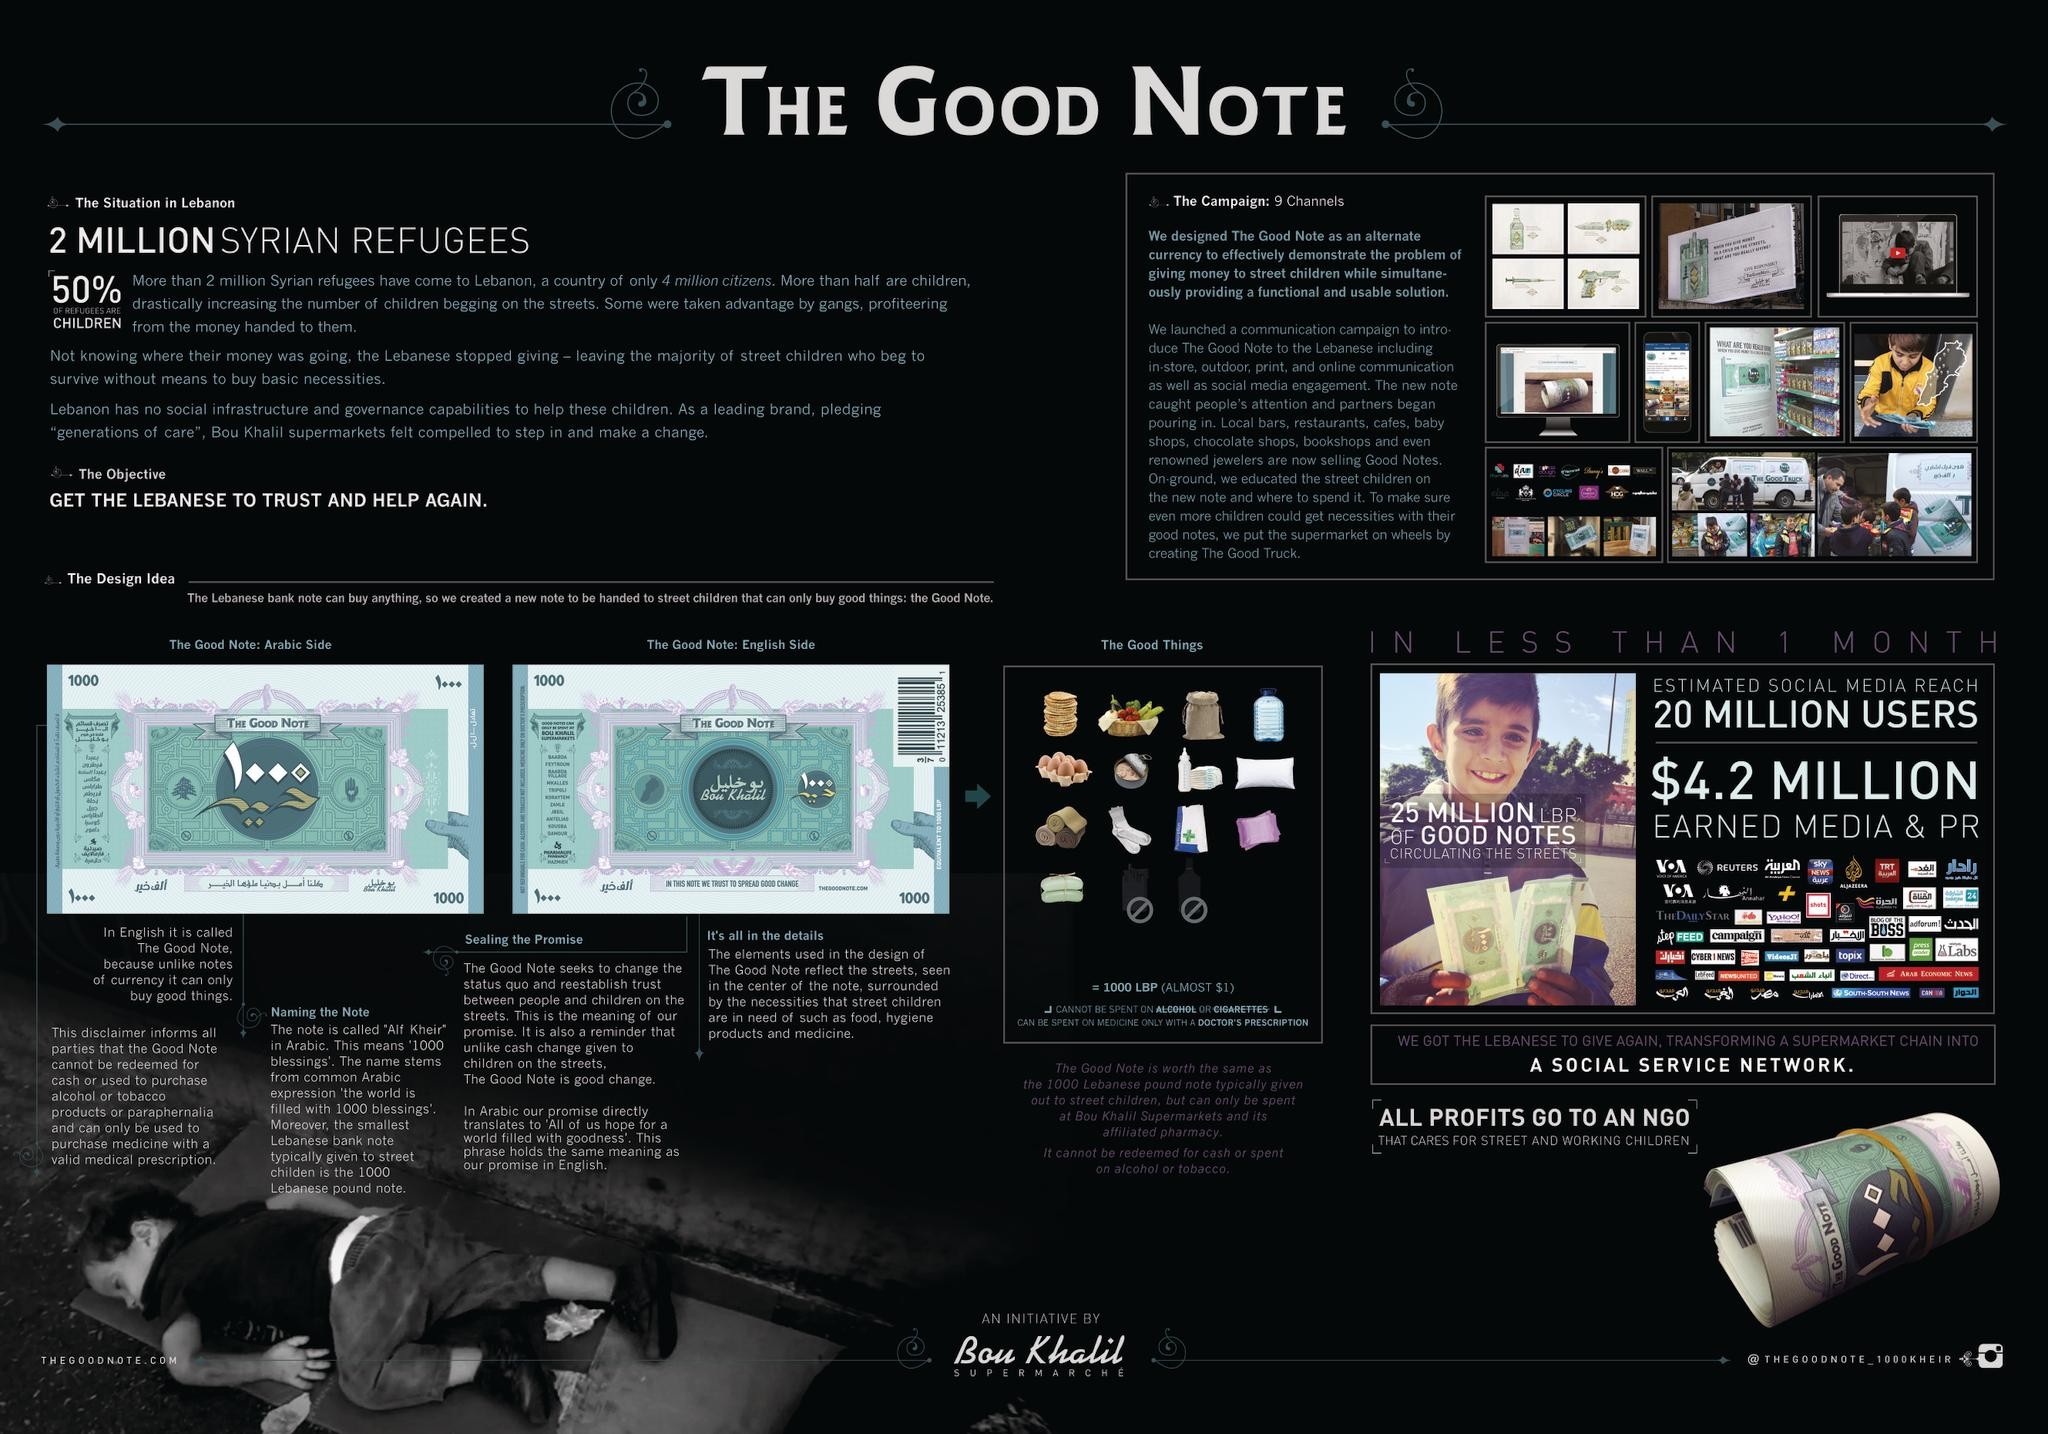 THE GOOD NOTE